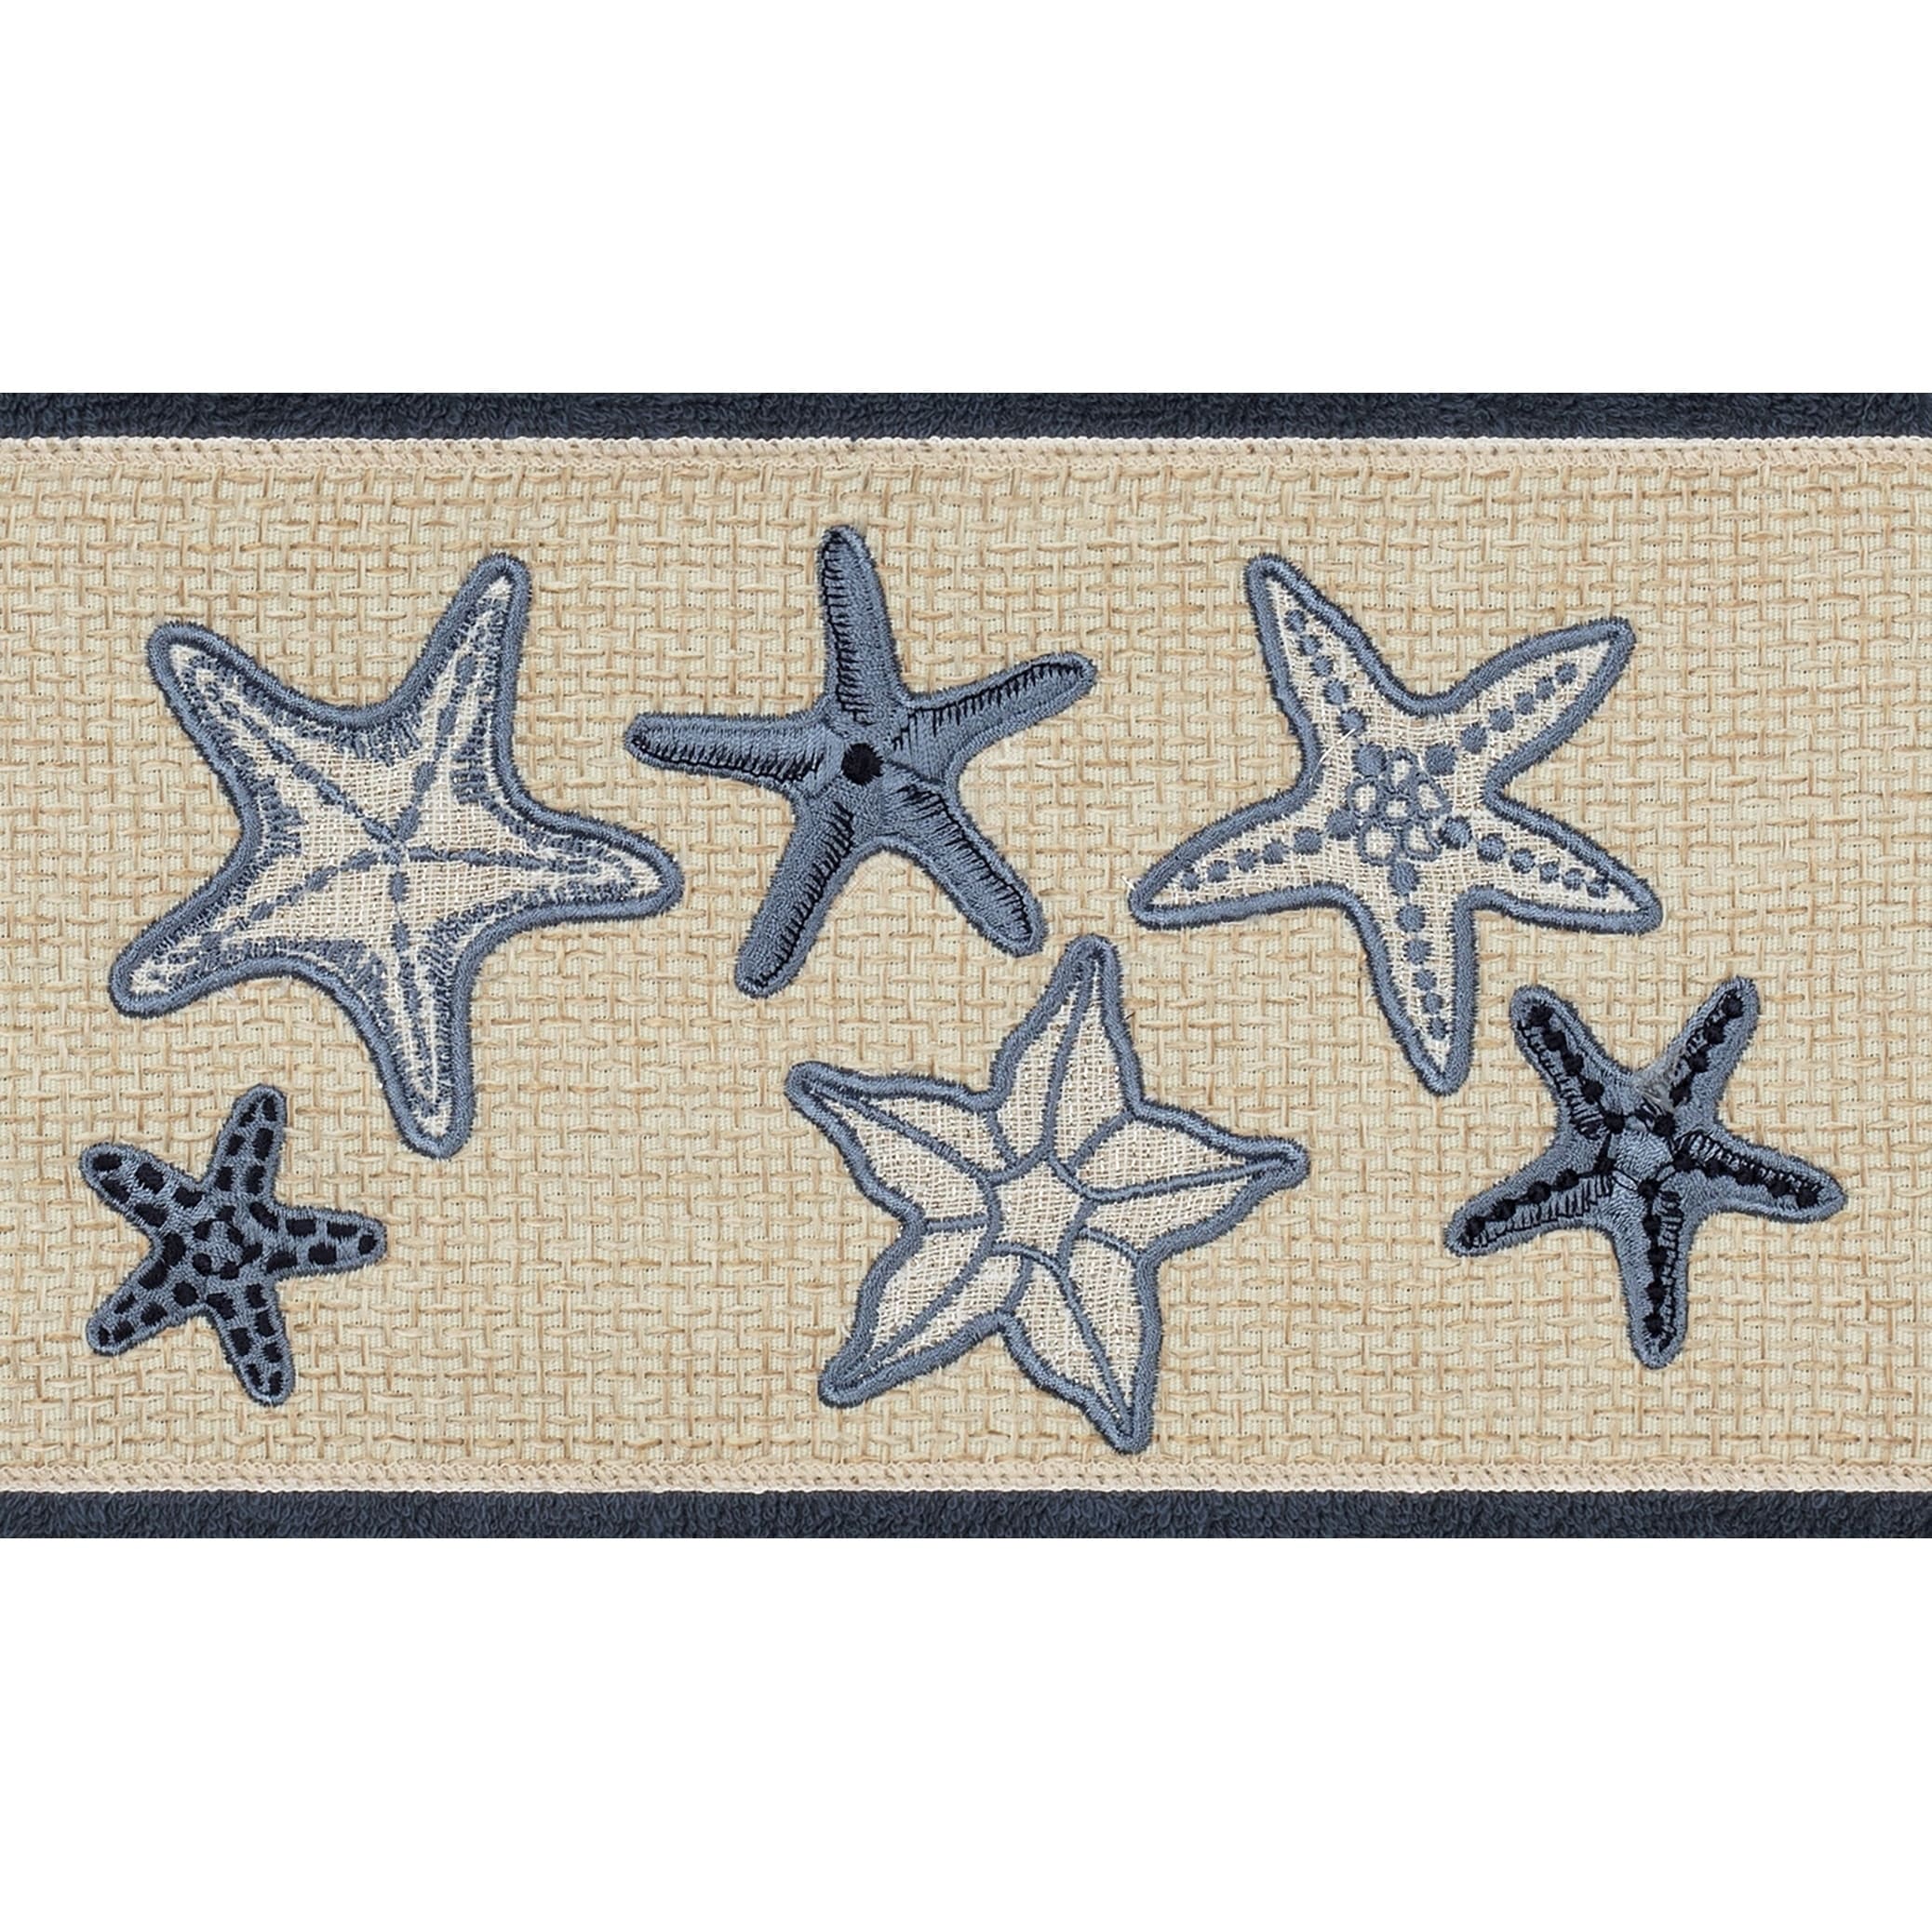 https://ak1.ostkcdn.com/images/products/21133741/Authentic-Hotel-and-Spa-Midnight-Blue-Turkish-Cotton-Starfish-Embroidered-4-piece-Towel-Set-363bc11d-c4ac-43b6-9ac7-0e377ee75294.jpg